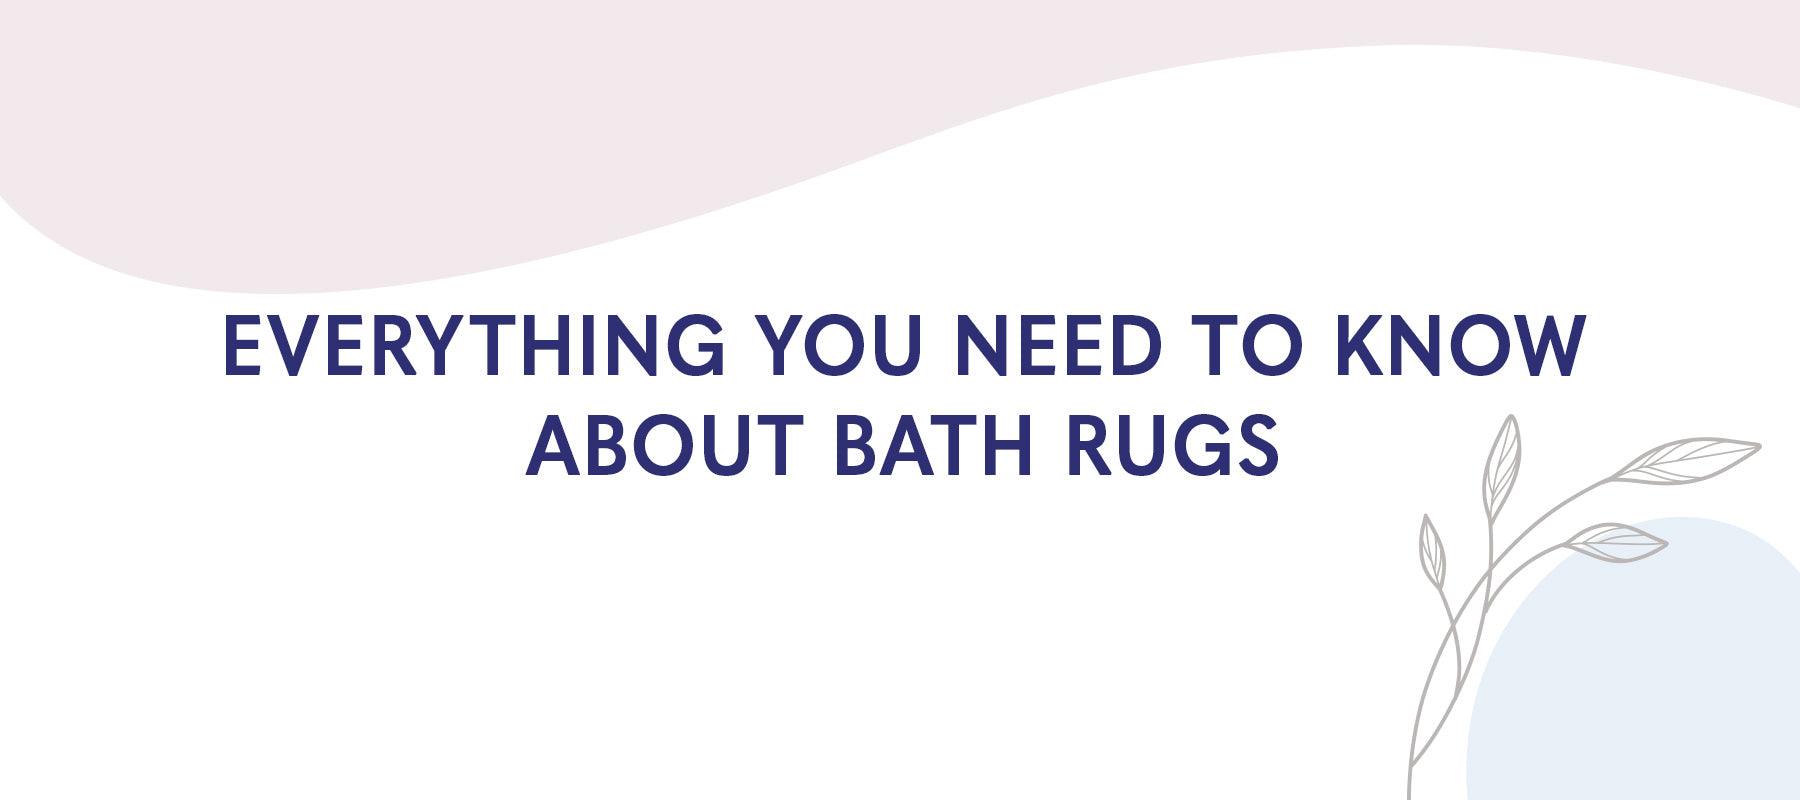 Step Onto Luxury: Pamper Your Feet With The Finest Luxury Bath Mat